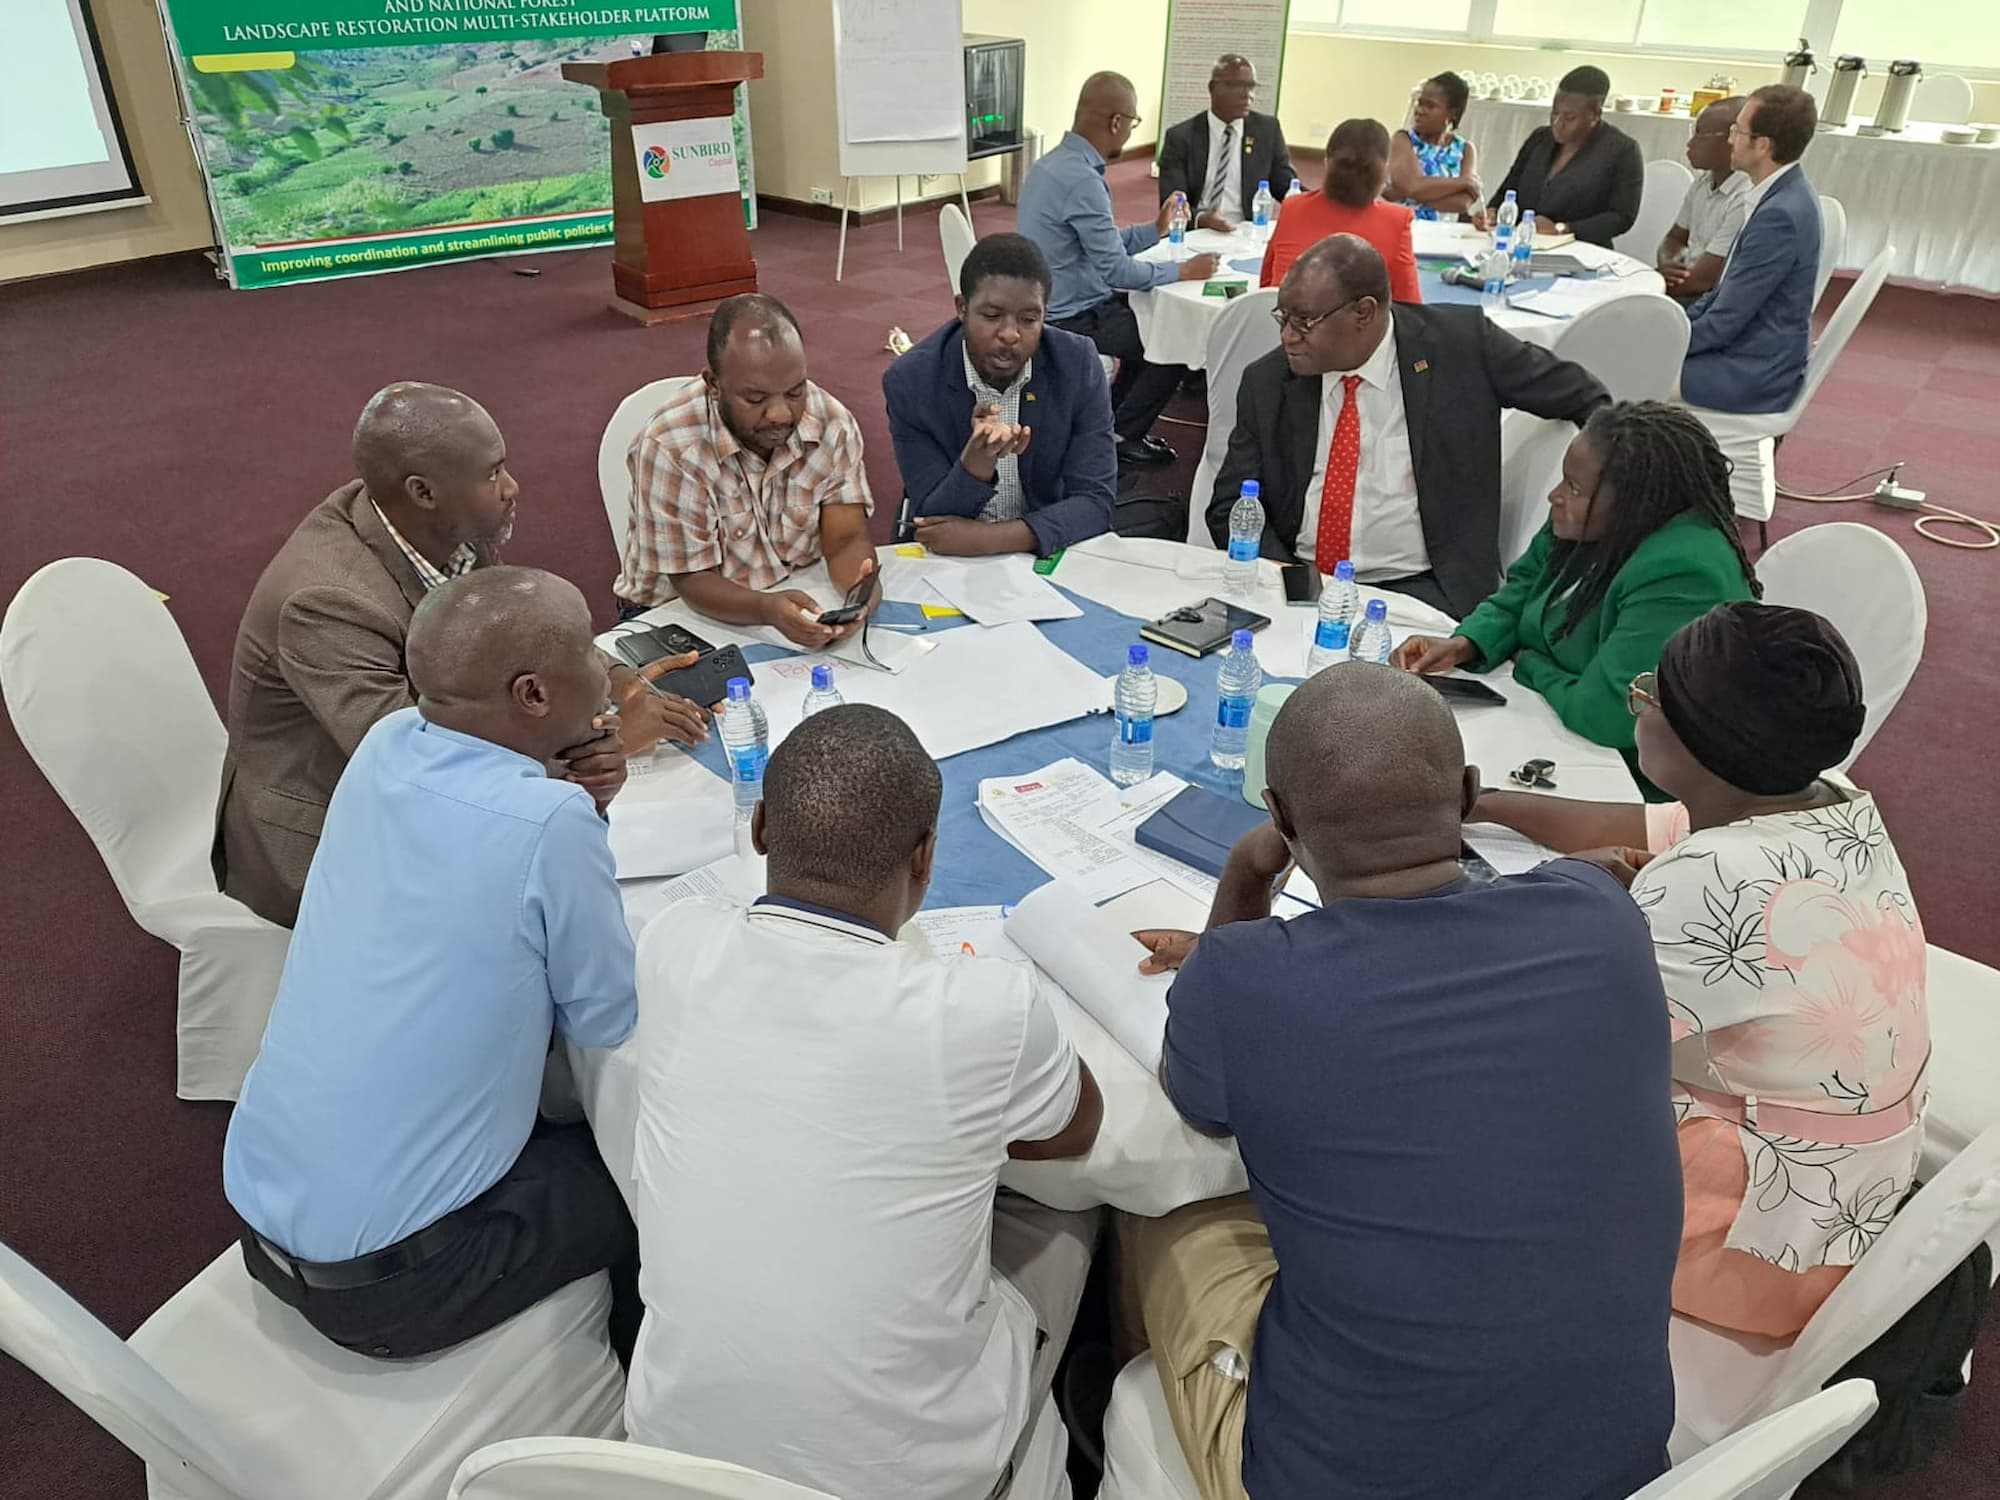 Stakeholders discussing the future of restoration MSP in Malawi. Credit: Diana Mawoko